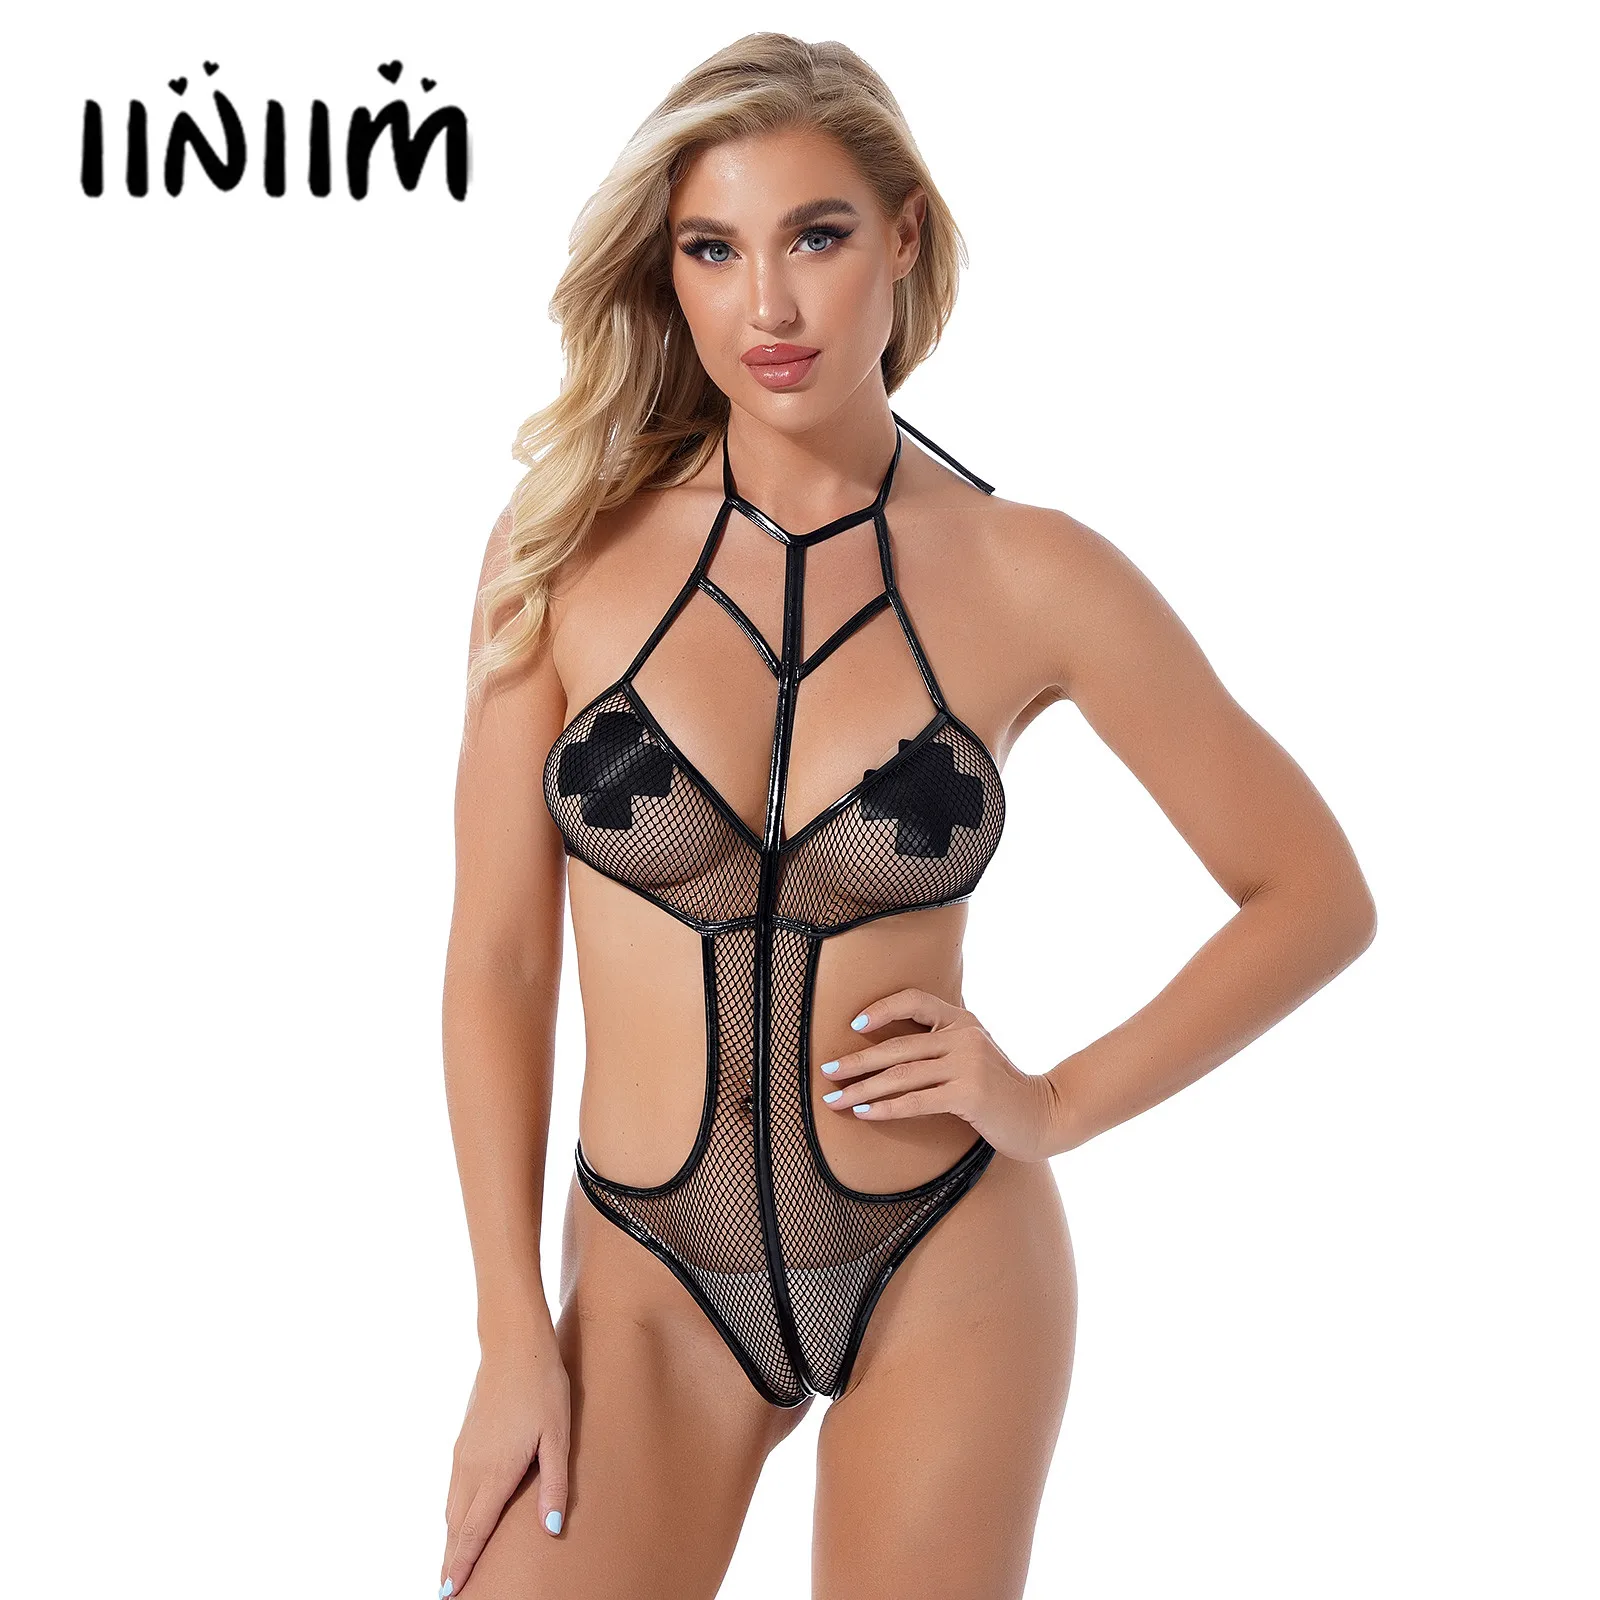 

Womens See-through Mesh Leotard Cutout Catsuit Strappy Hollow Out Fishnet Bodysuit Halter Lace-up Erotic Lingeries Teddies